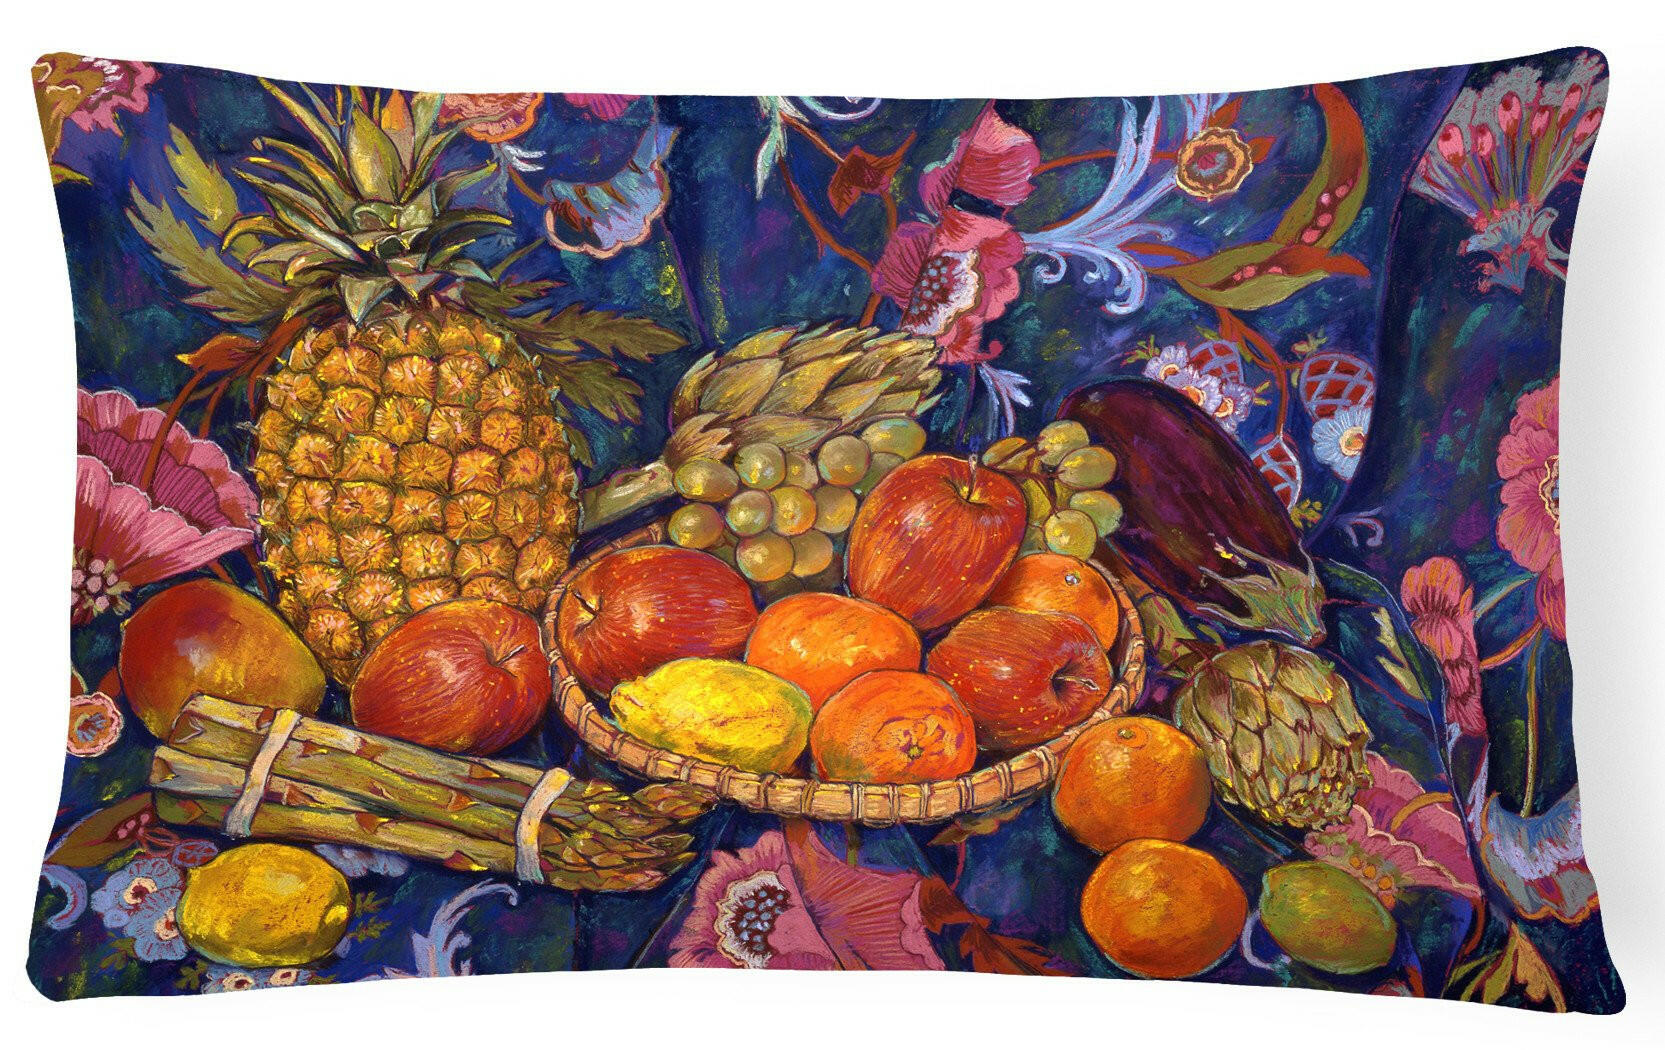 Fruit & Vegetables by Neil Drury Fabric Decorative Pillow DND0018PW1216 by Caroline's Treasures